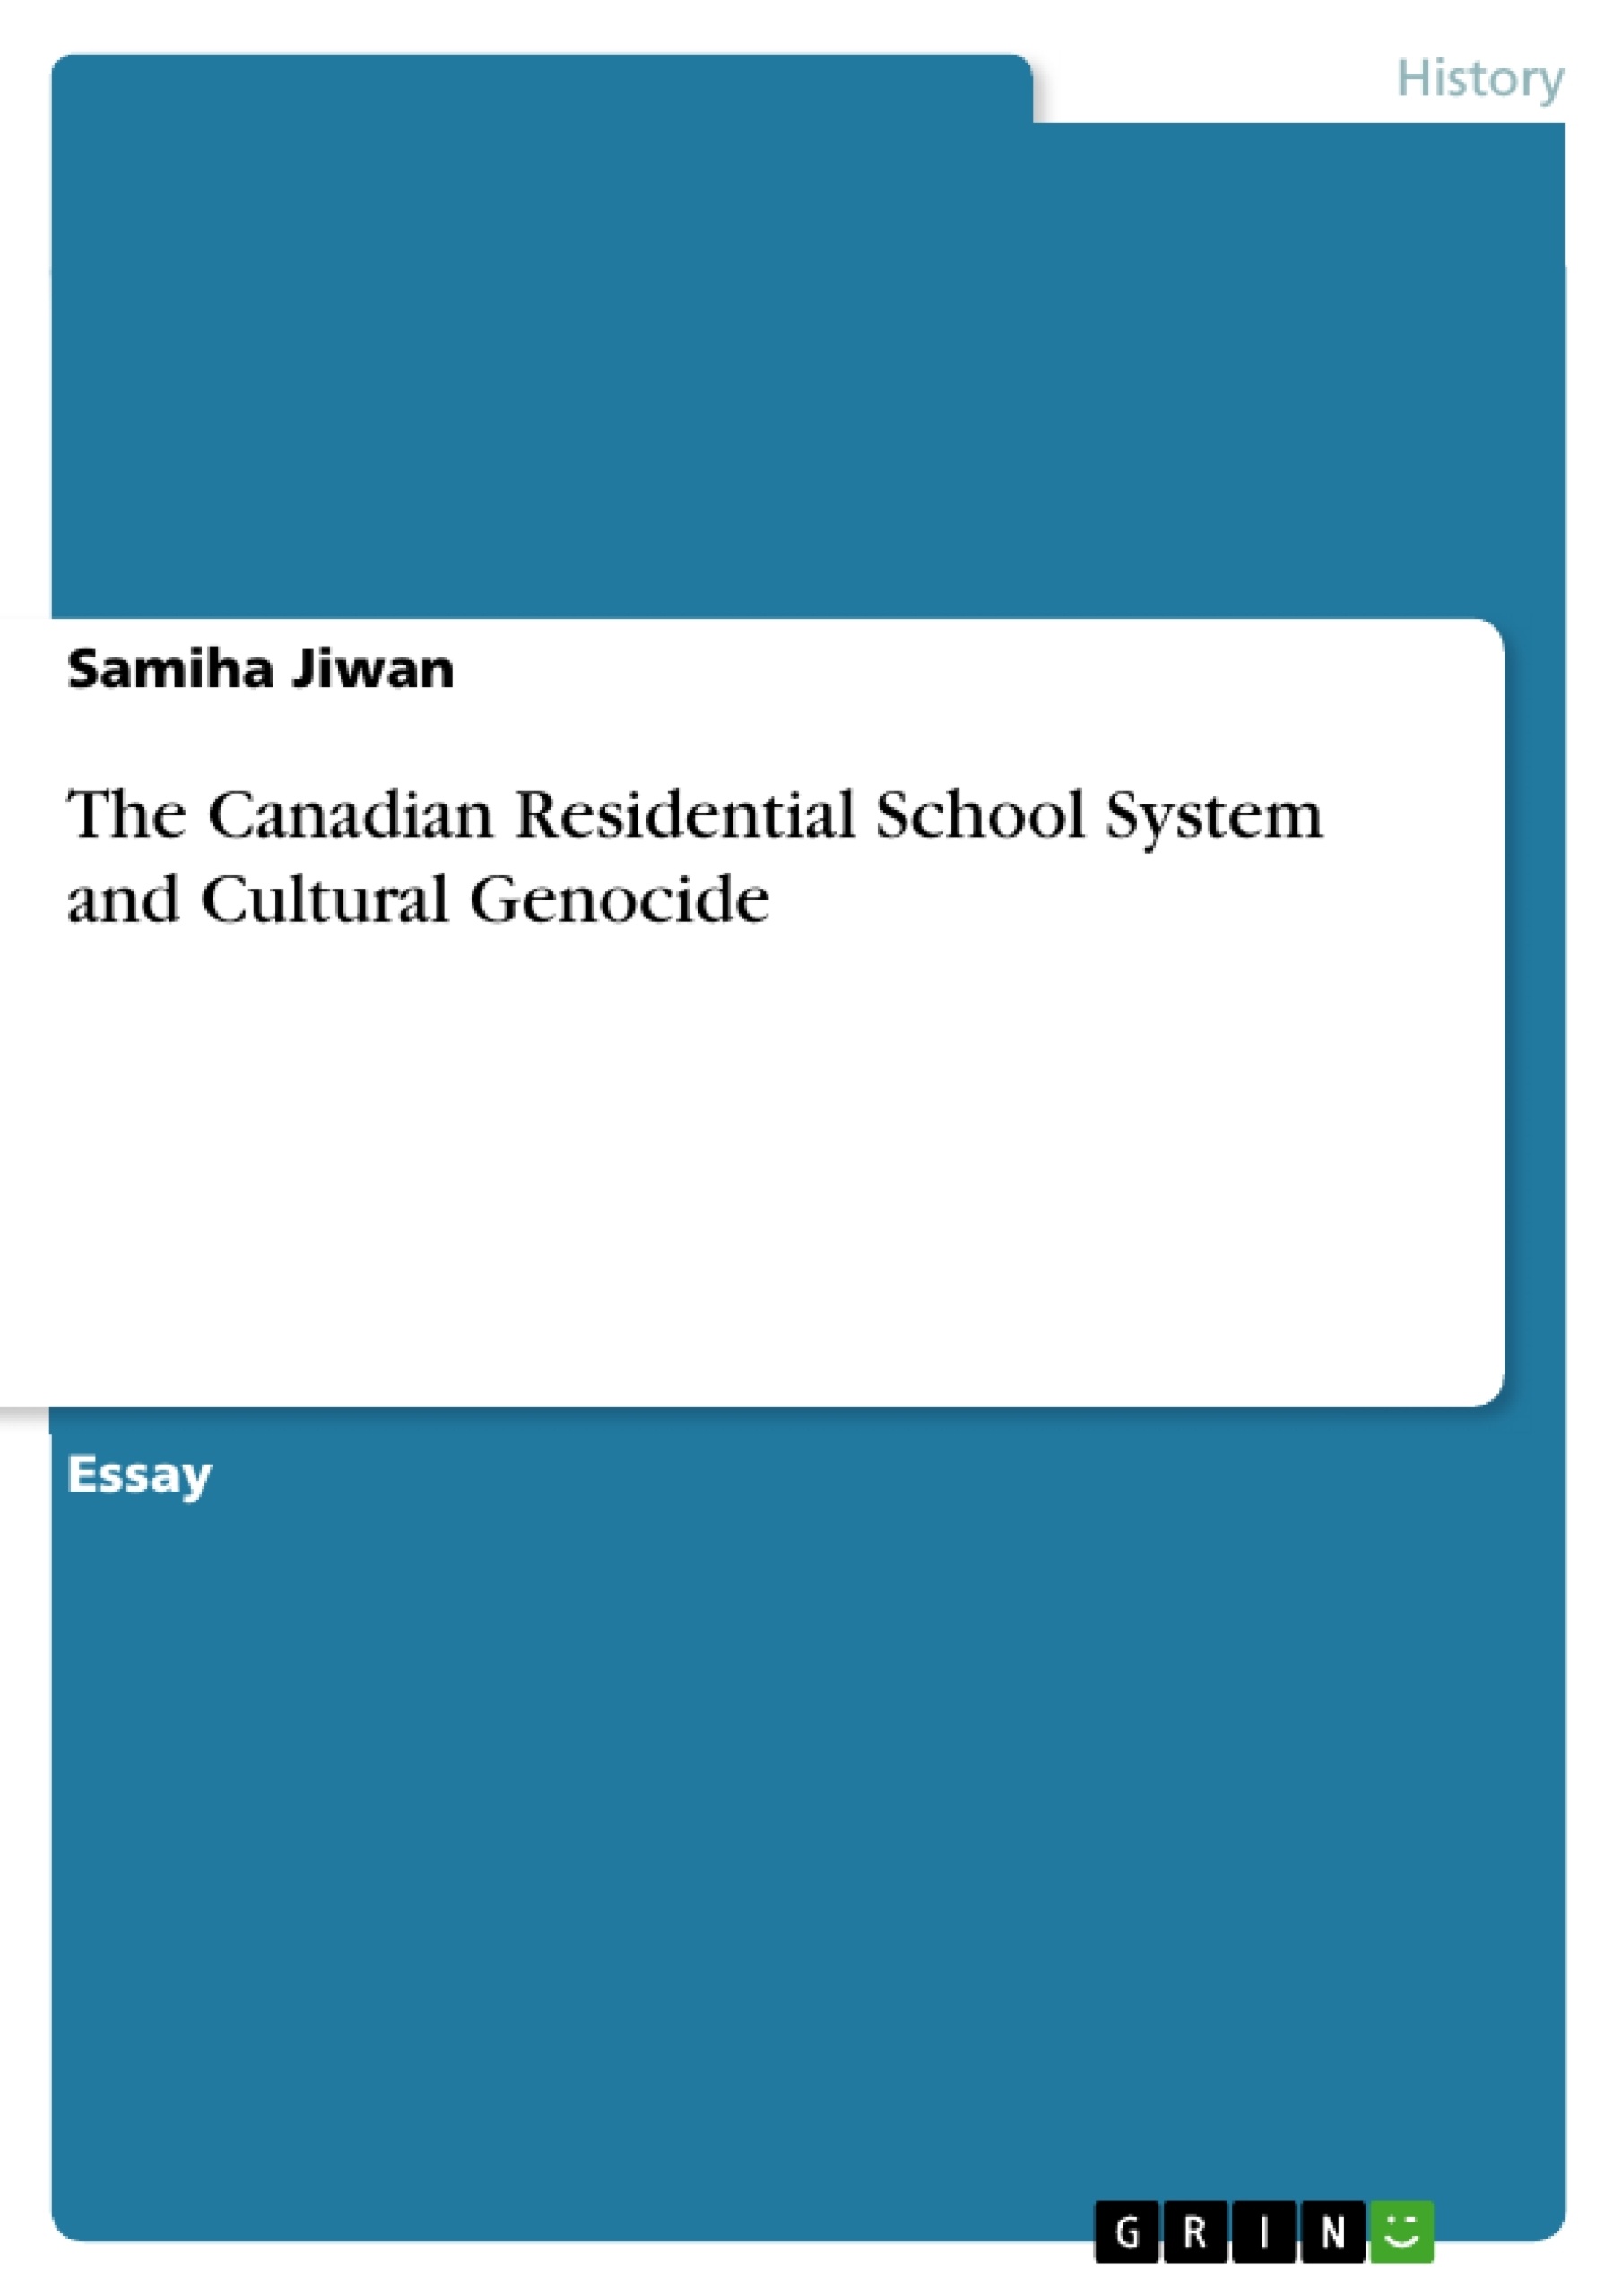 Titel: The Canadian Residential School System and Cultural Genocide